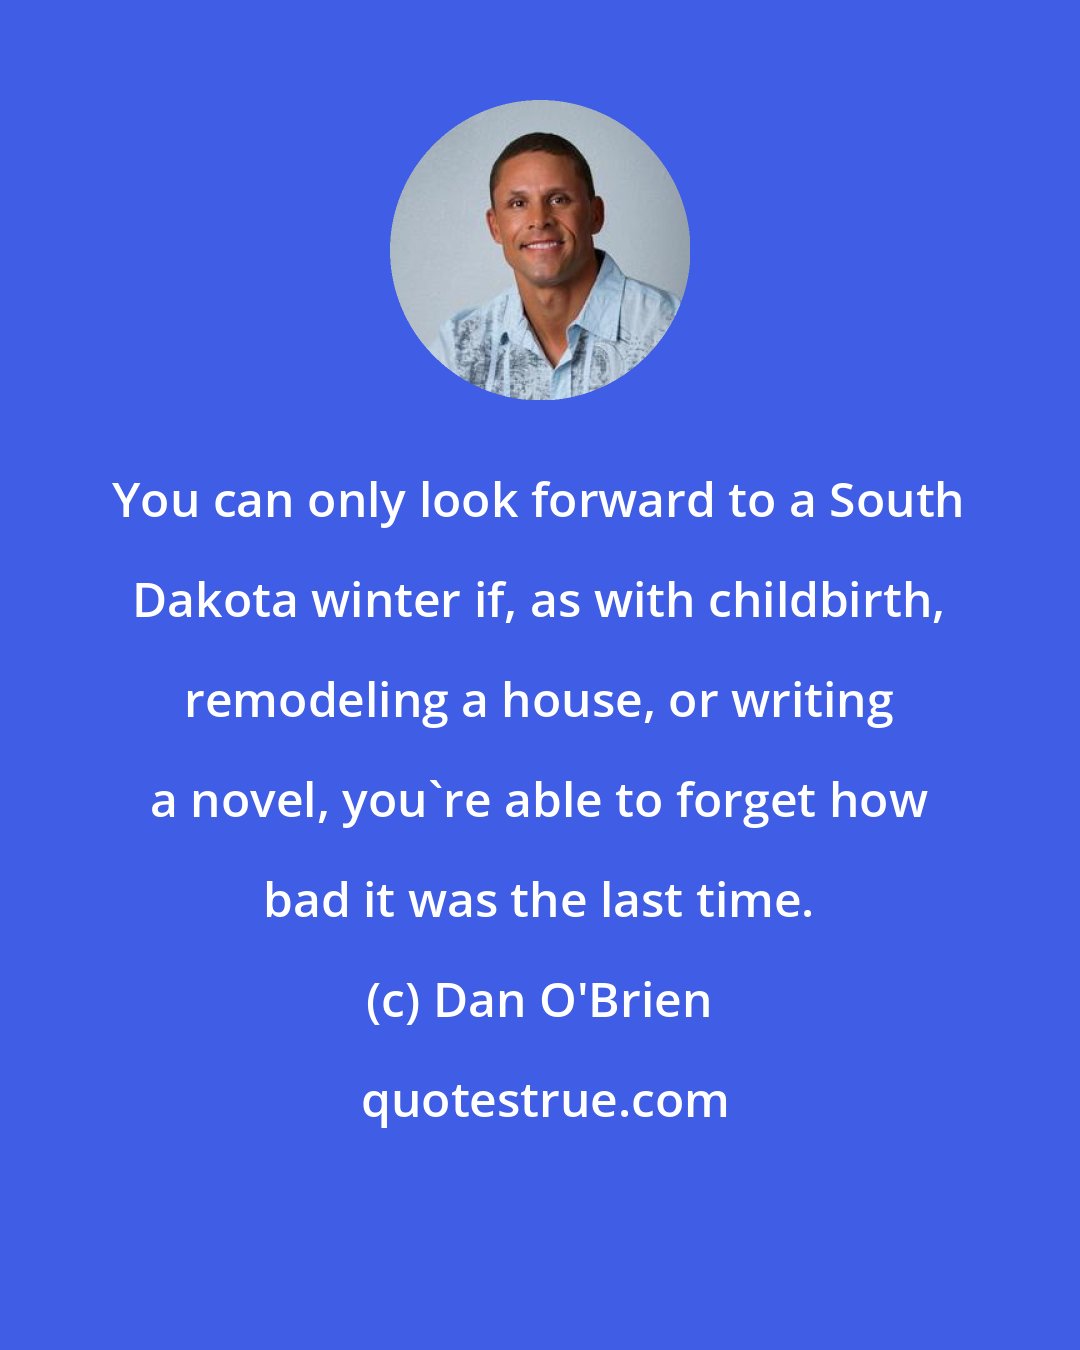 Dan O'Brien: You can only look forward to a South Dakota winter if, as with childbirth, remodeling a house, or writing a novel, you're able to forget how bad it was the last time.